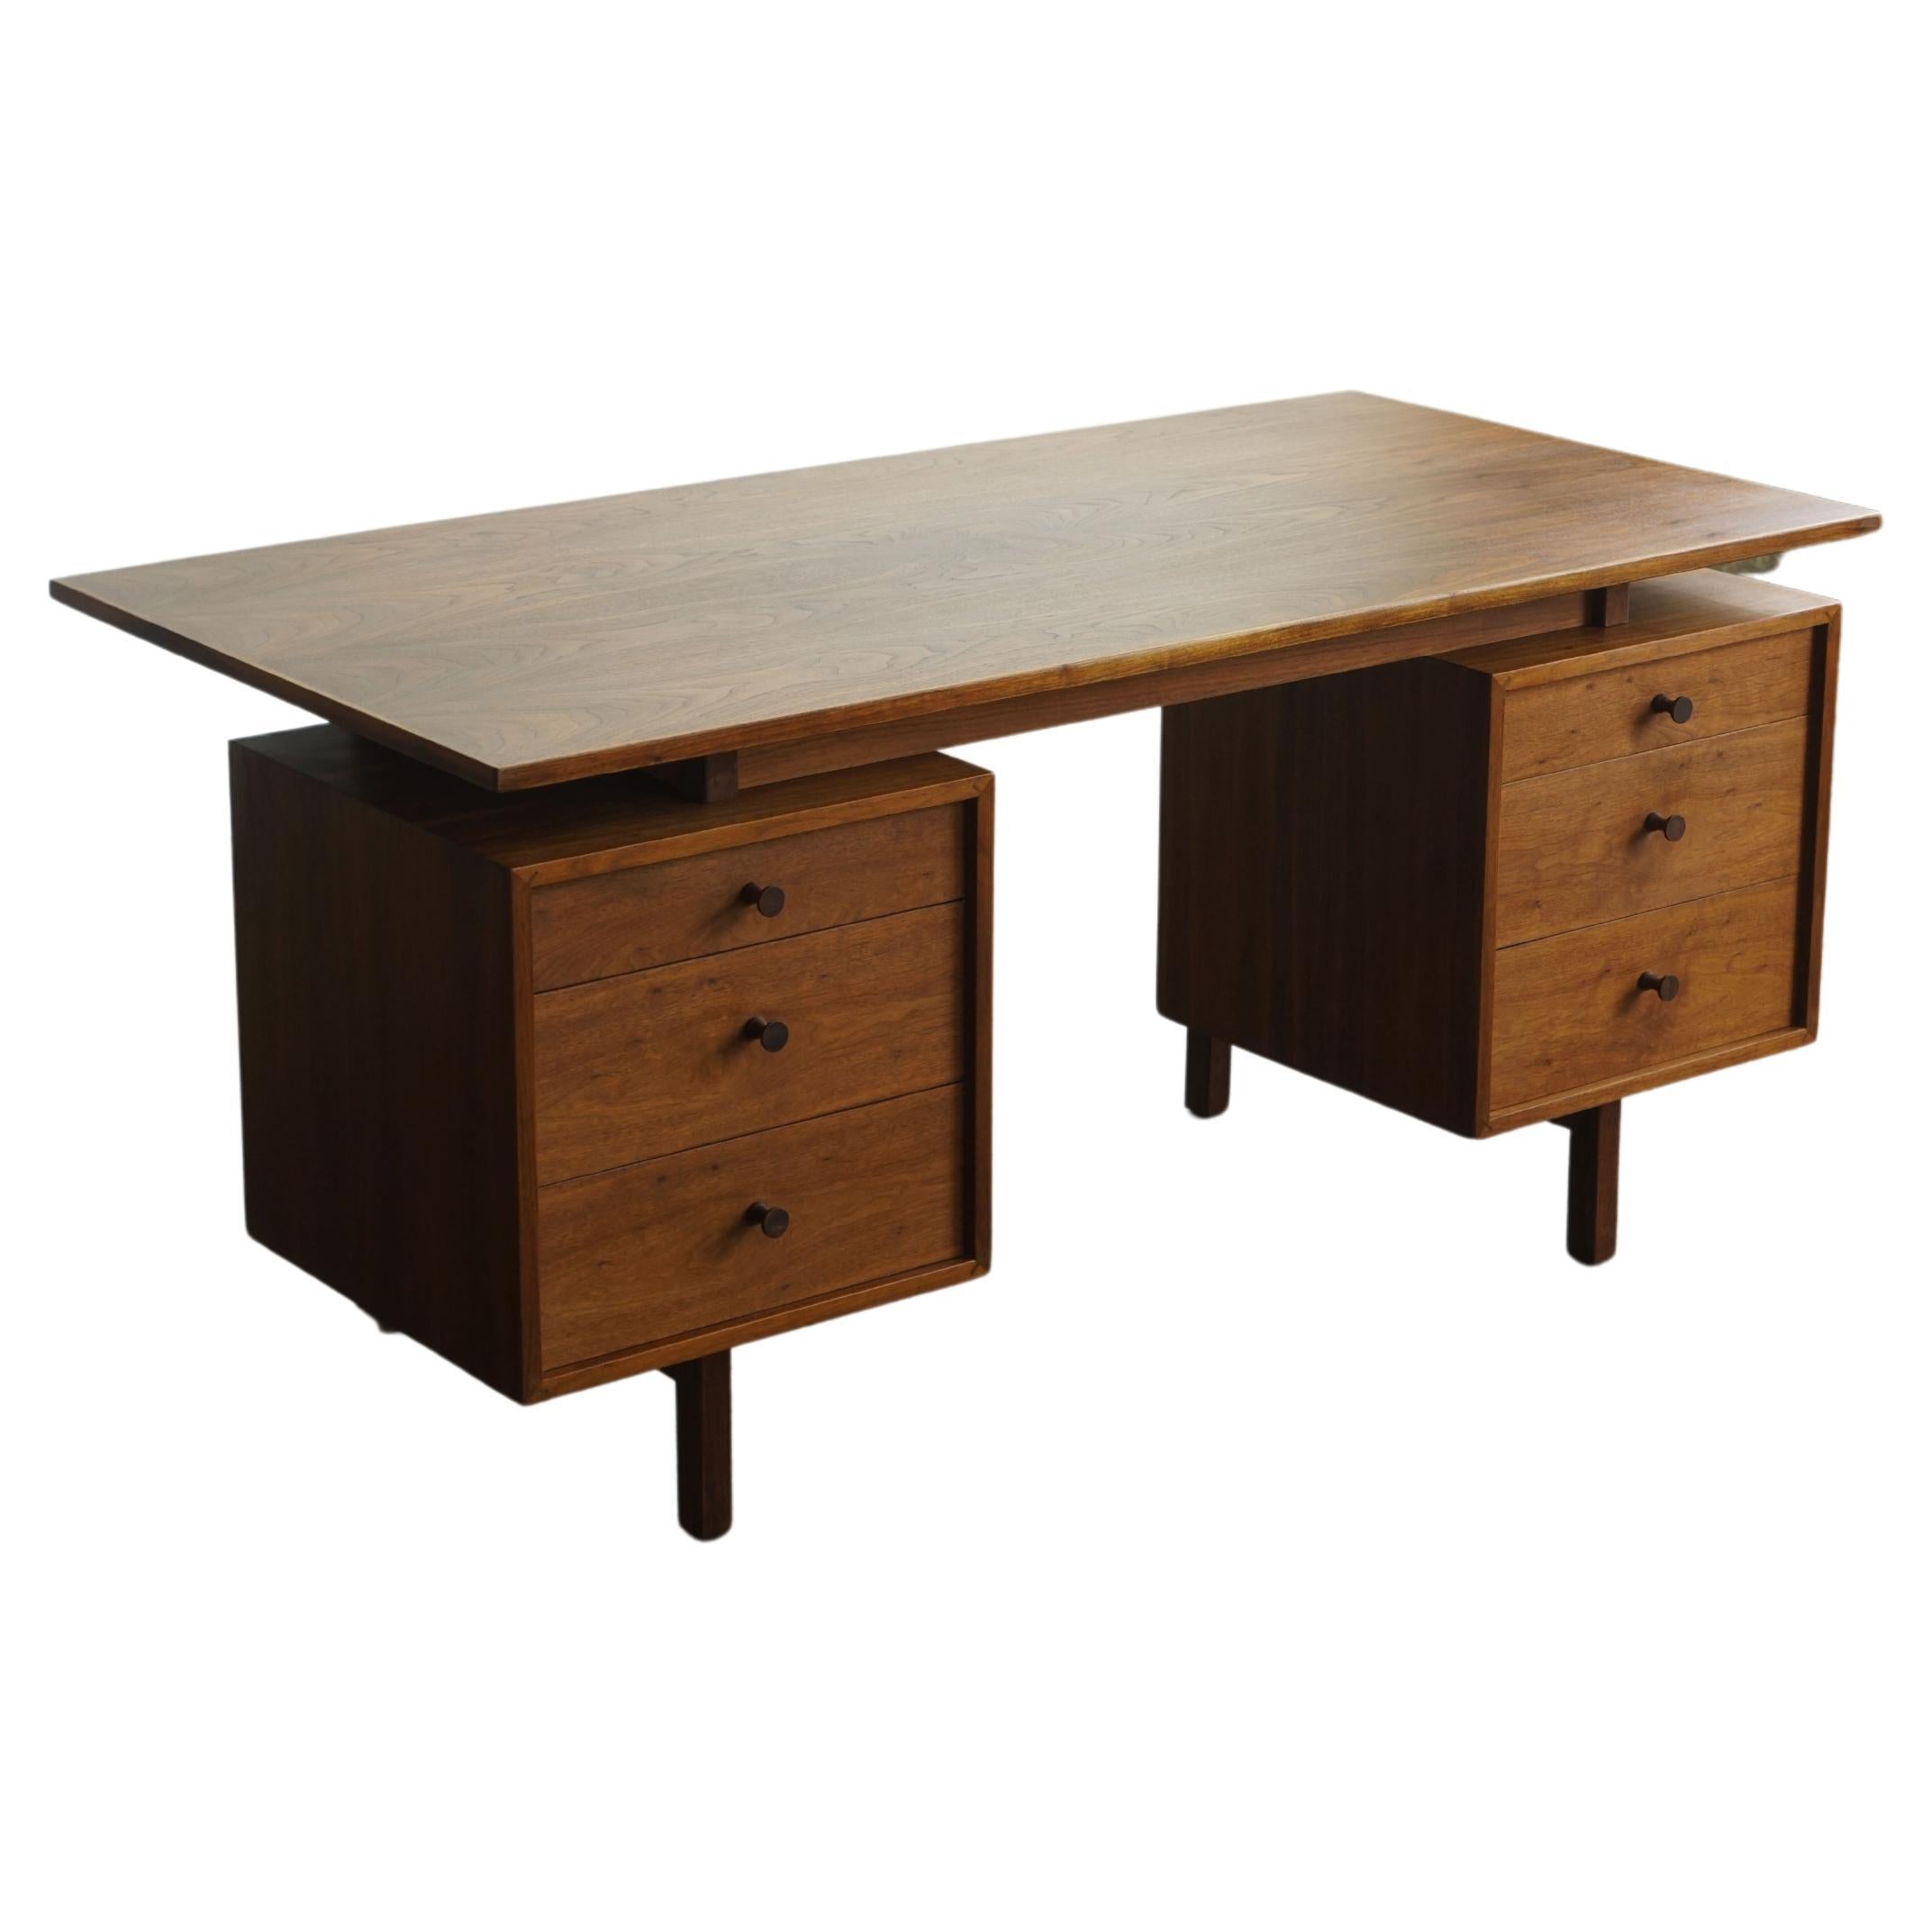 1960's Mid Century Modern Walnut Executive desk with floating top